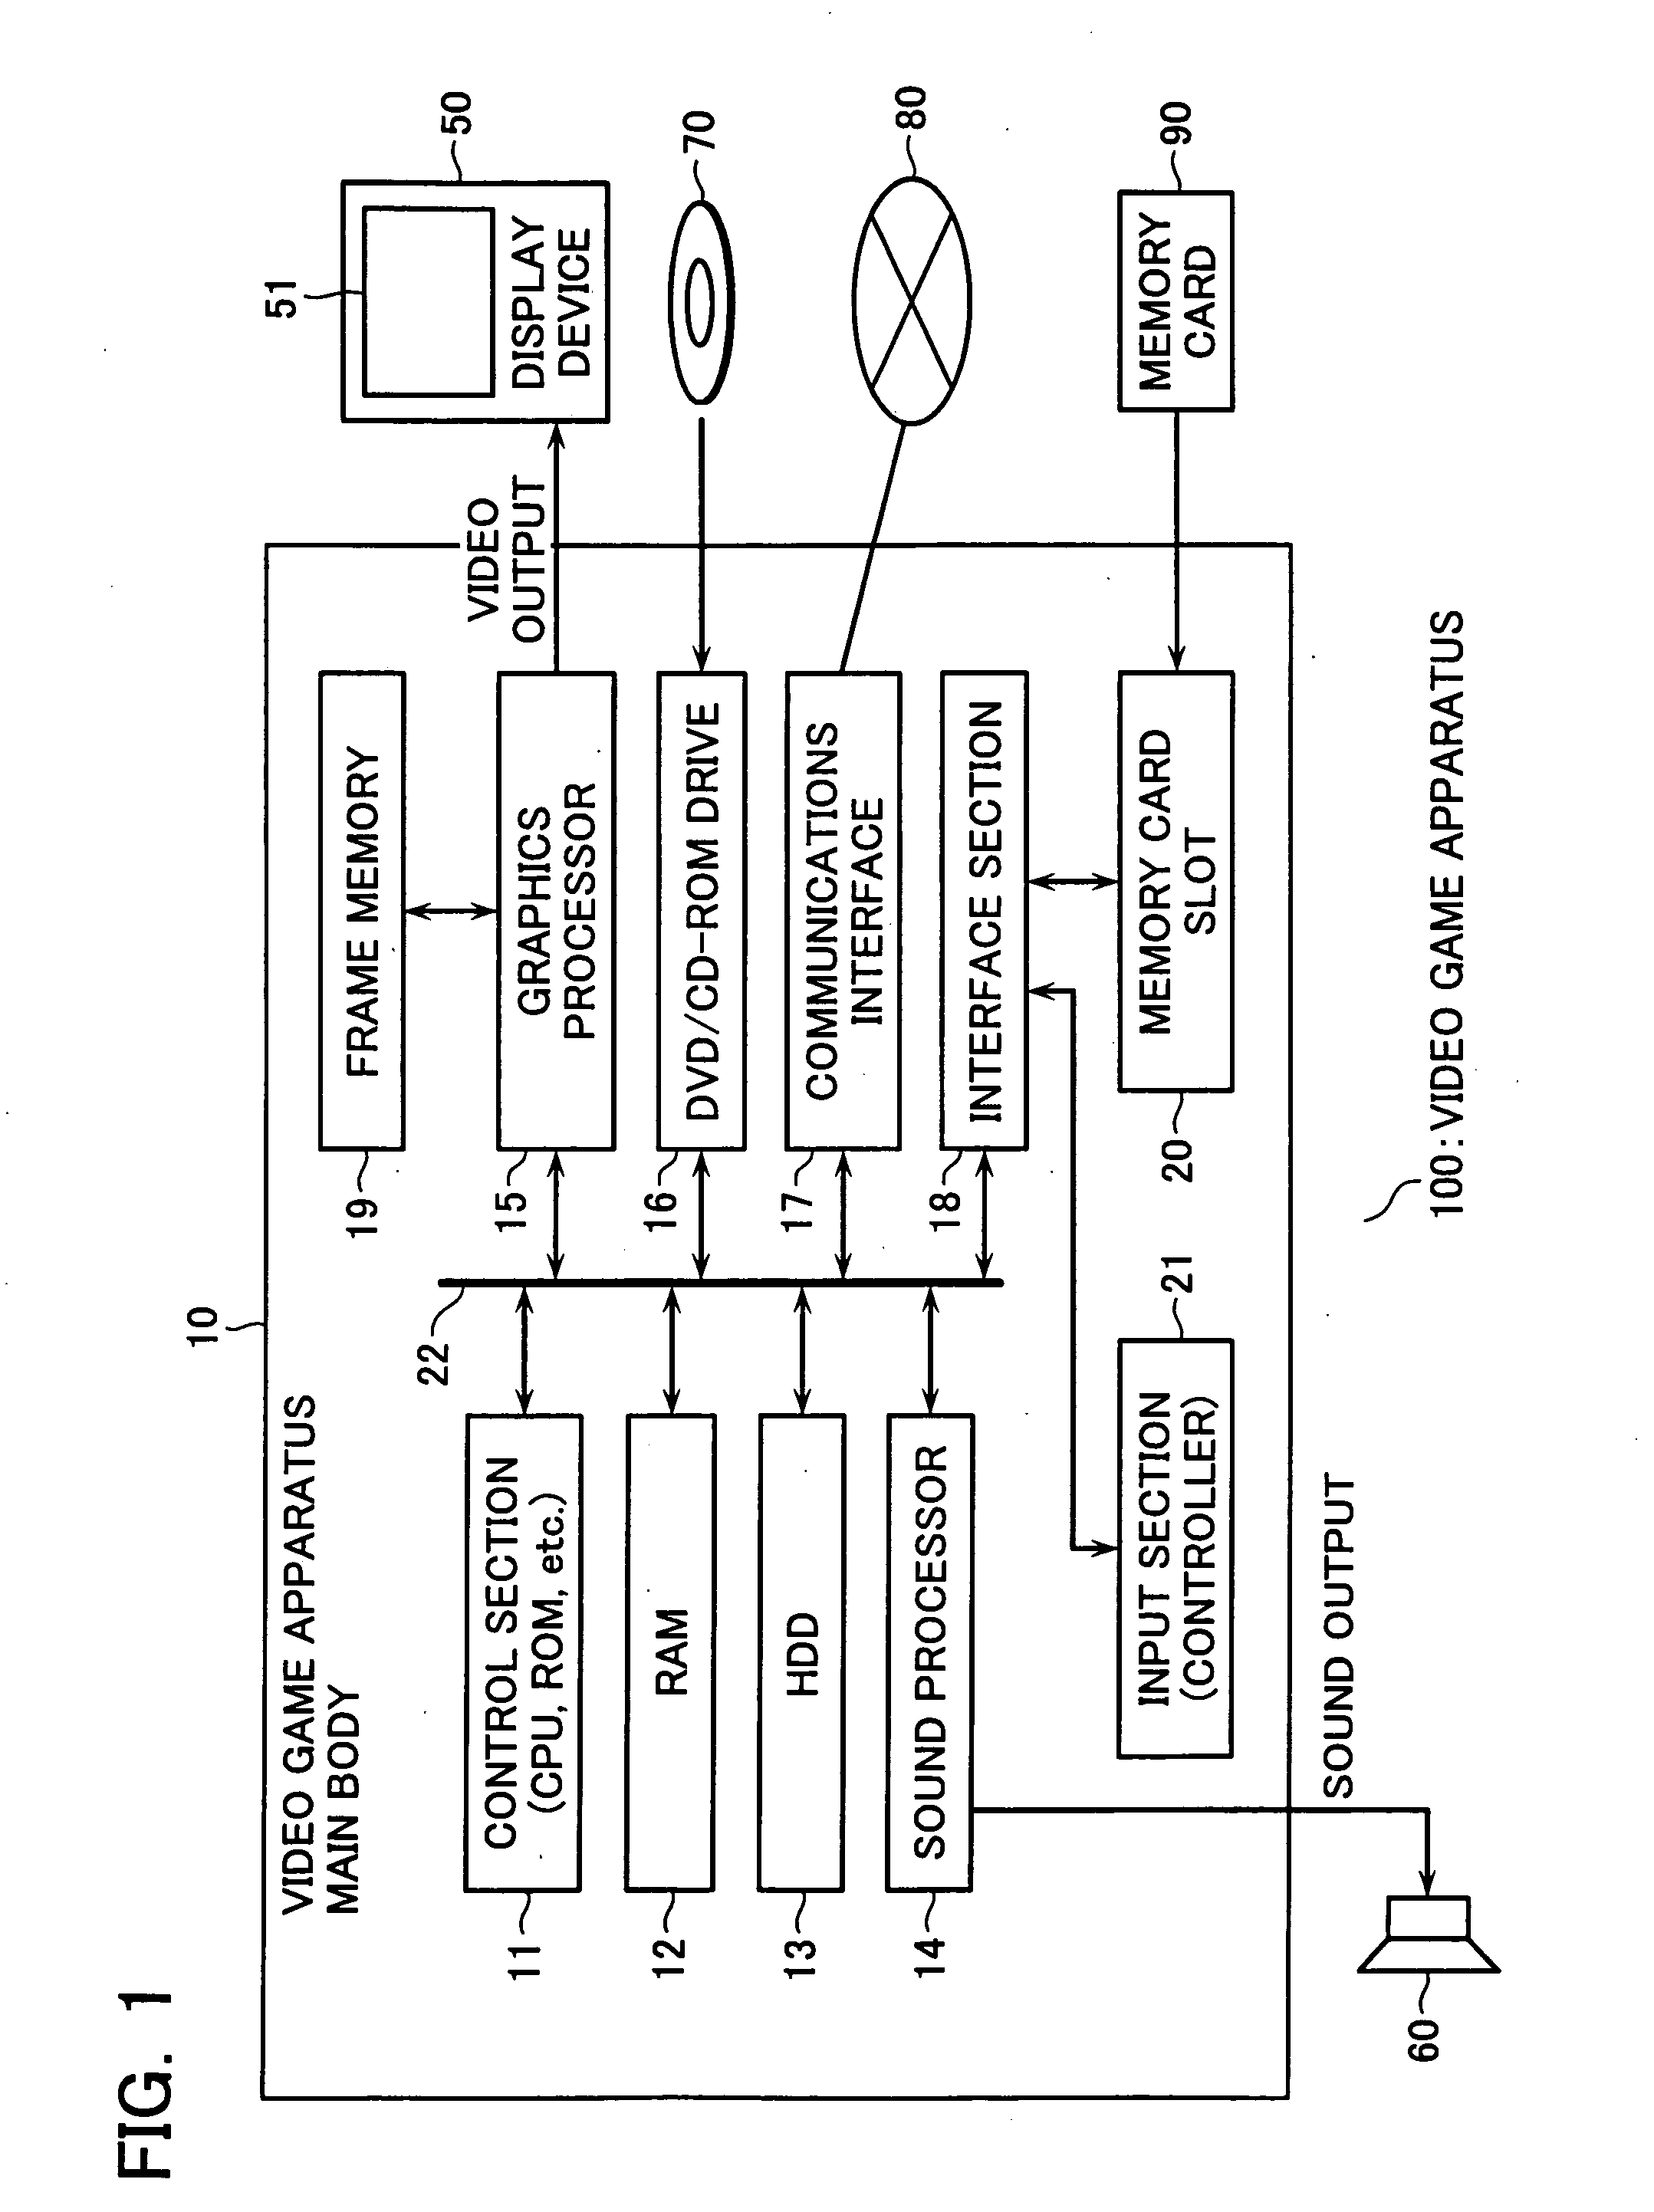 Method, an apparatus and a computer program product for generating an image